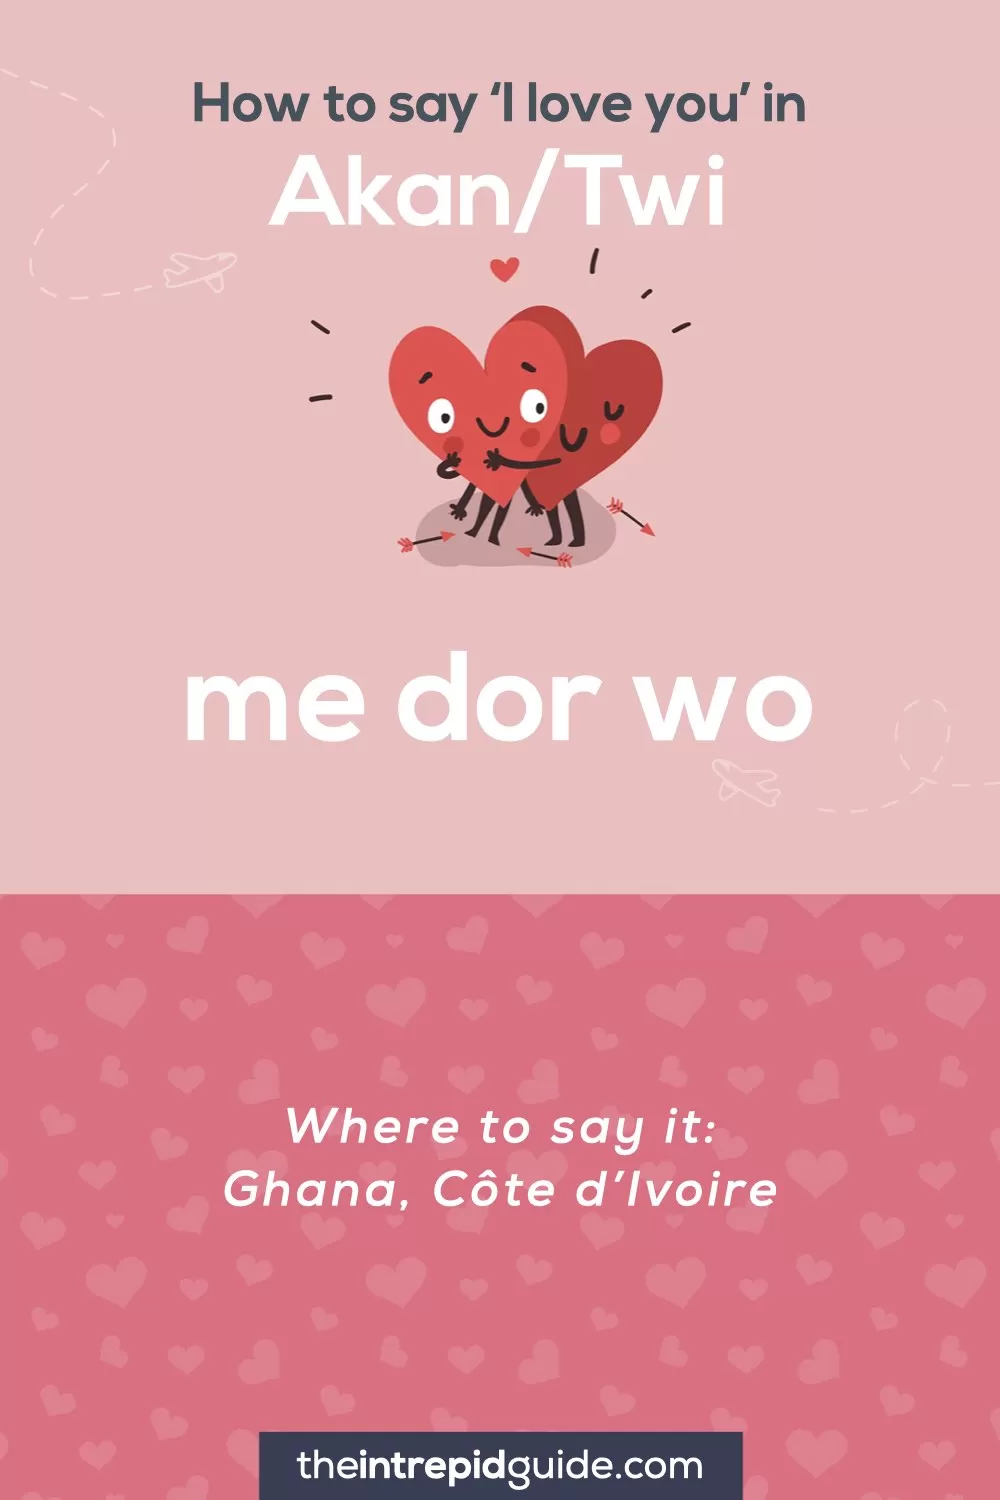 How to say I love you in different languages - Akan Twi - Me dor wo